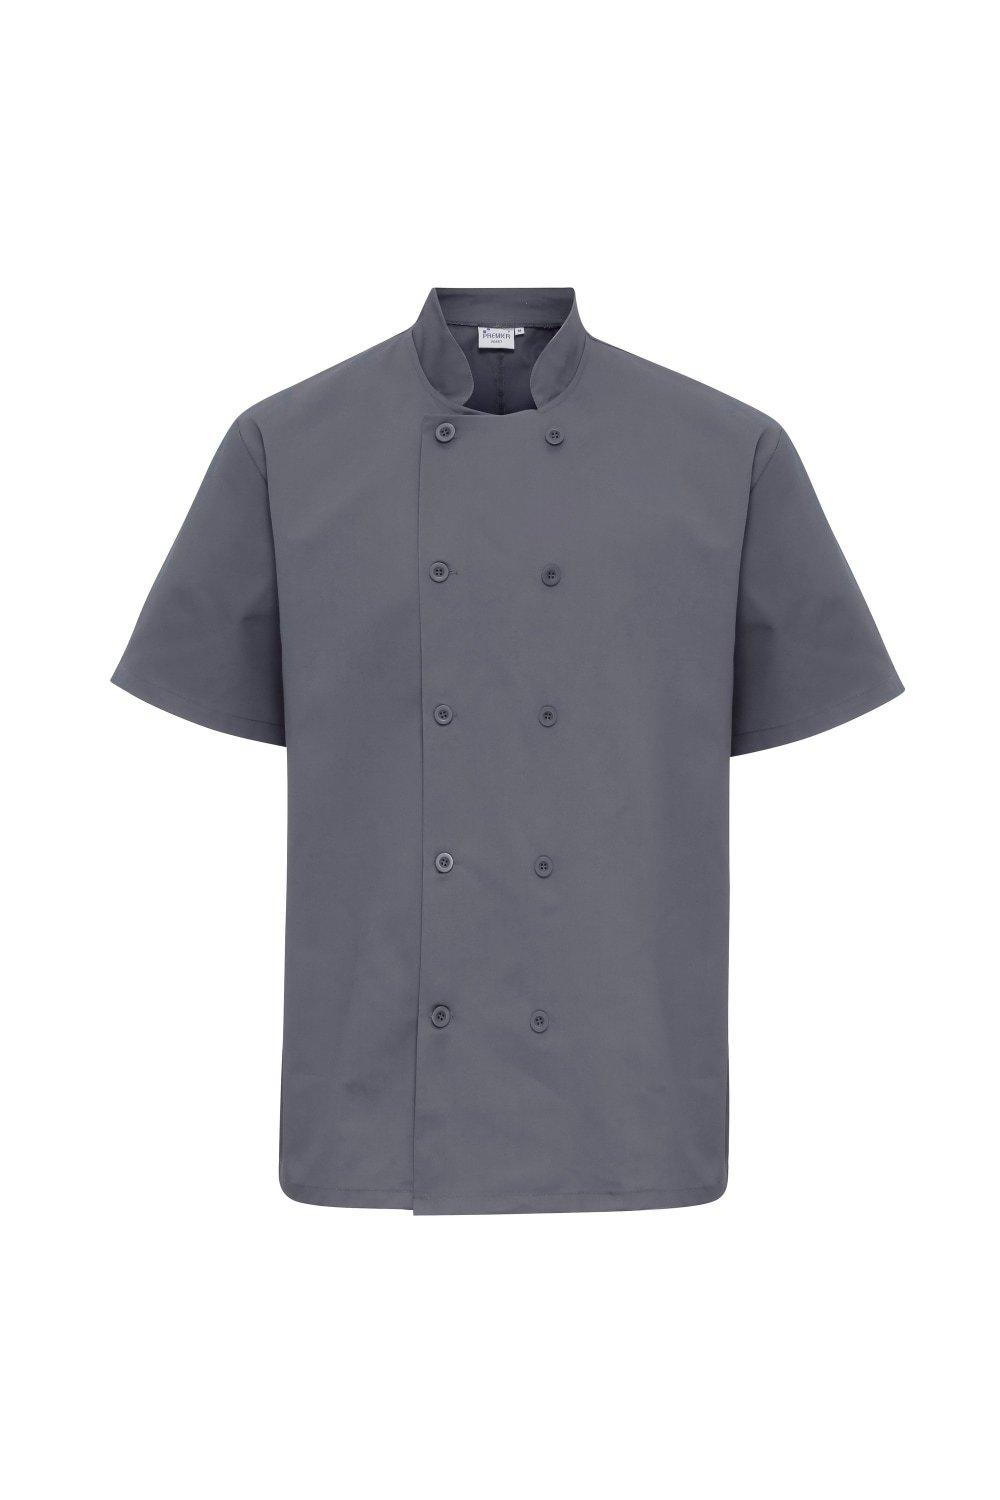 Short Sleeved Chefs Jacket Workwear Pack of 2